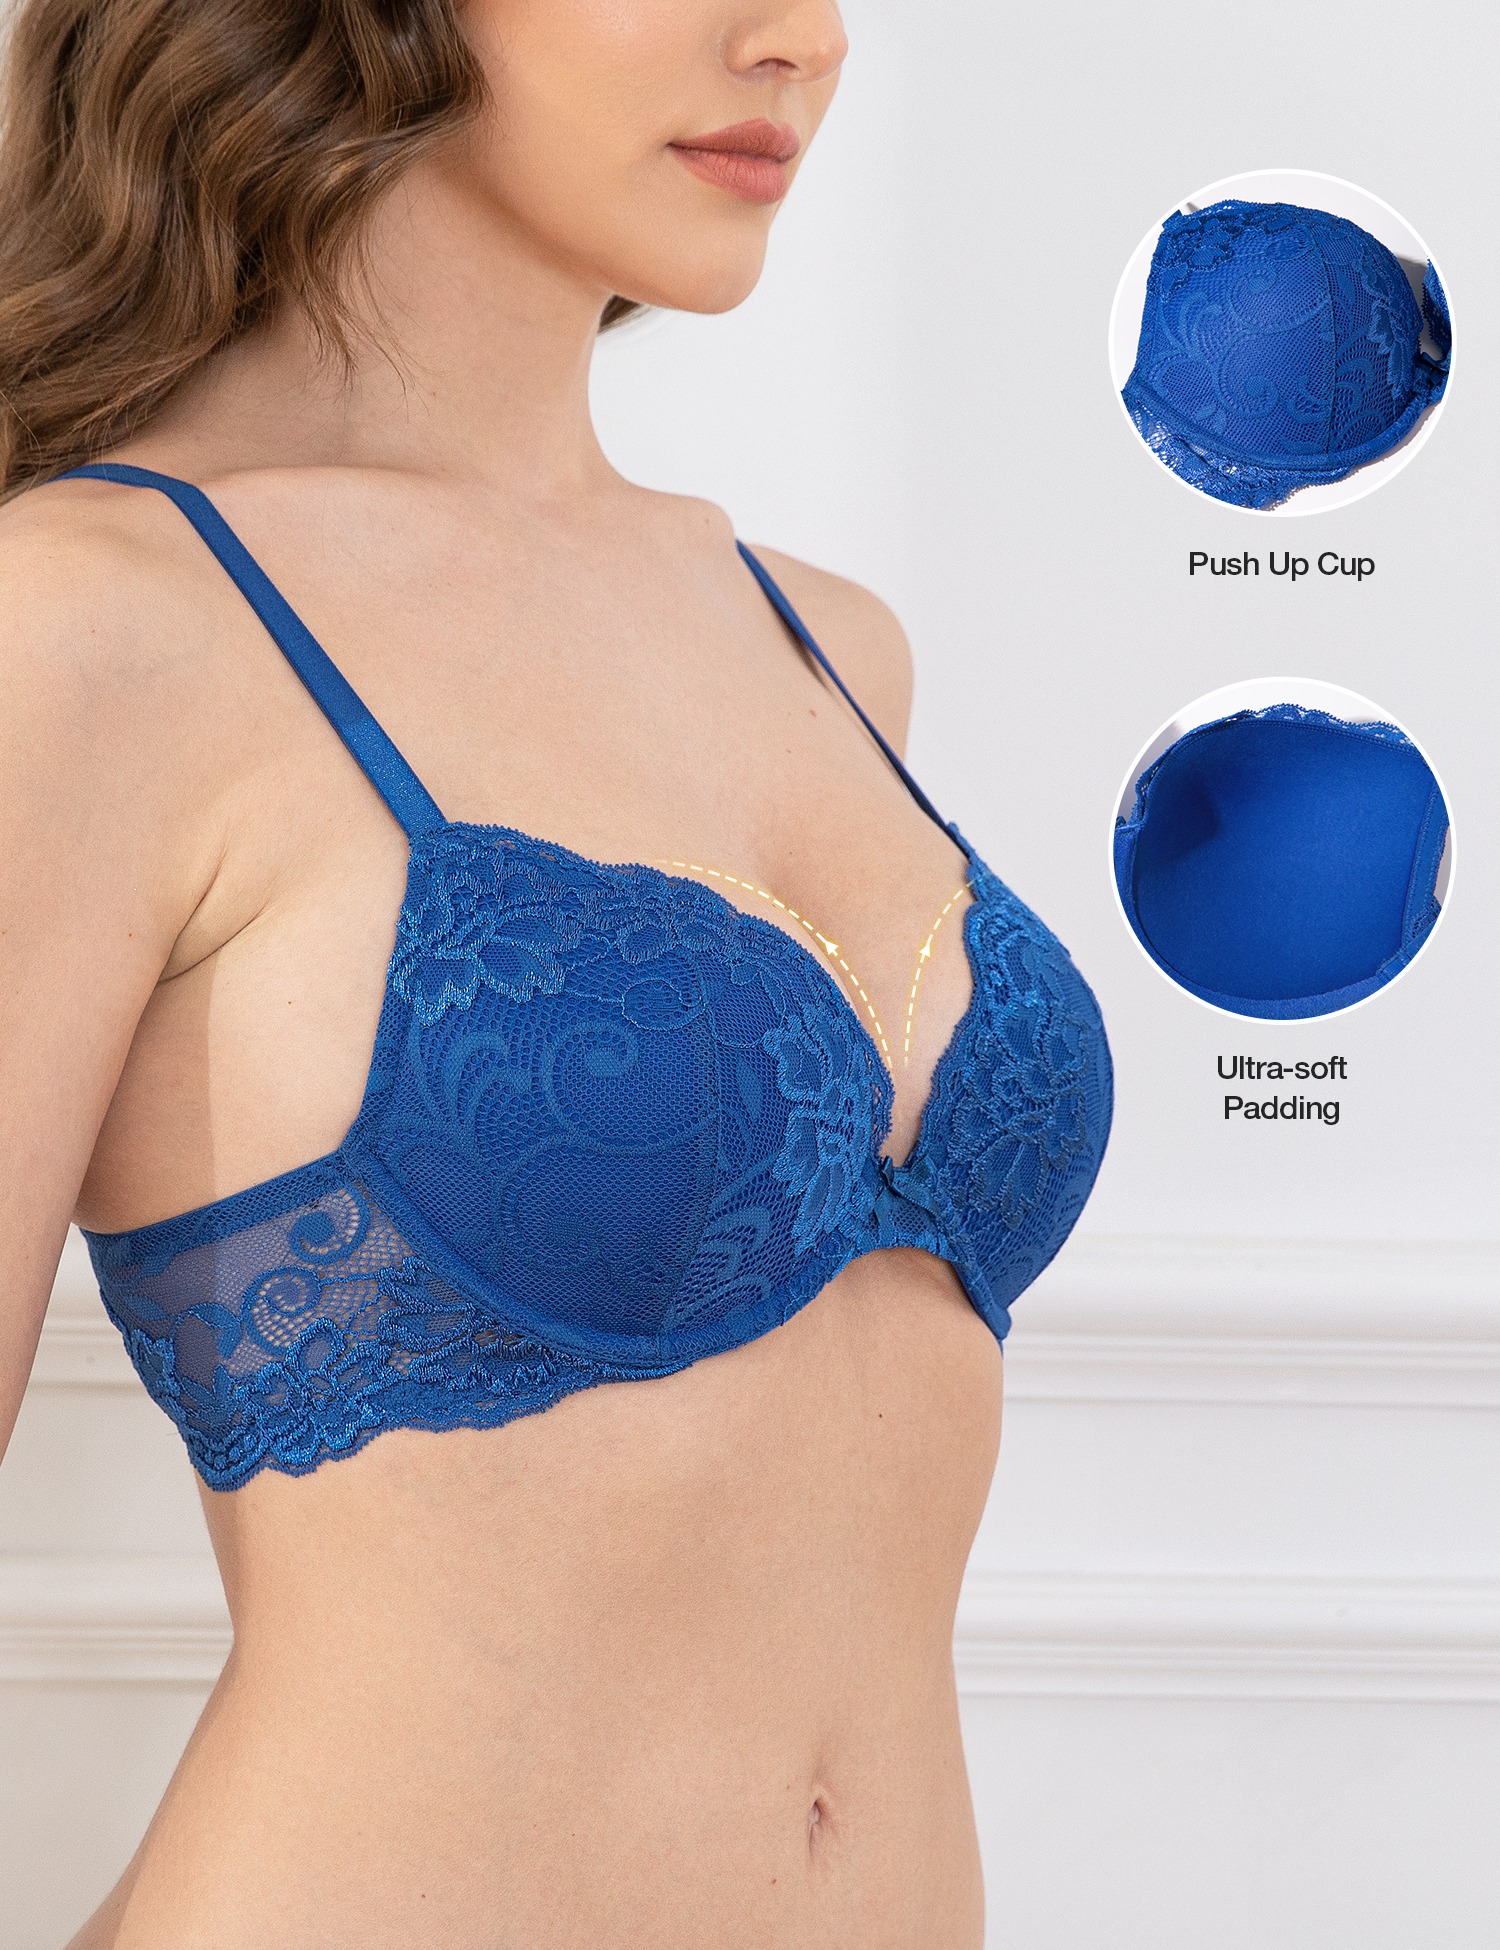 Deyllo Women's Push Up Bra Padded Plunge Add Cups Underwire Sexy Lace Lift Up Bra, royal blue 34B - image 3 of 8